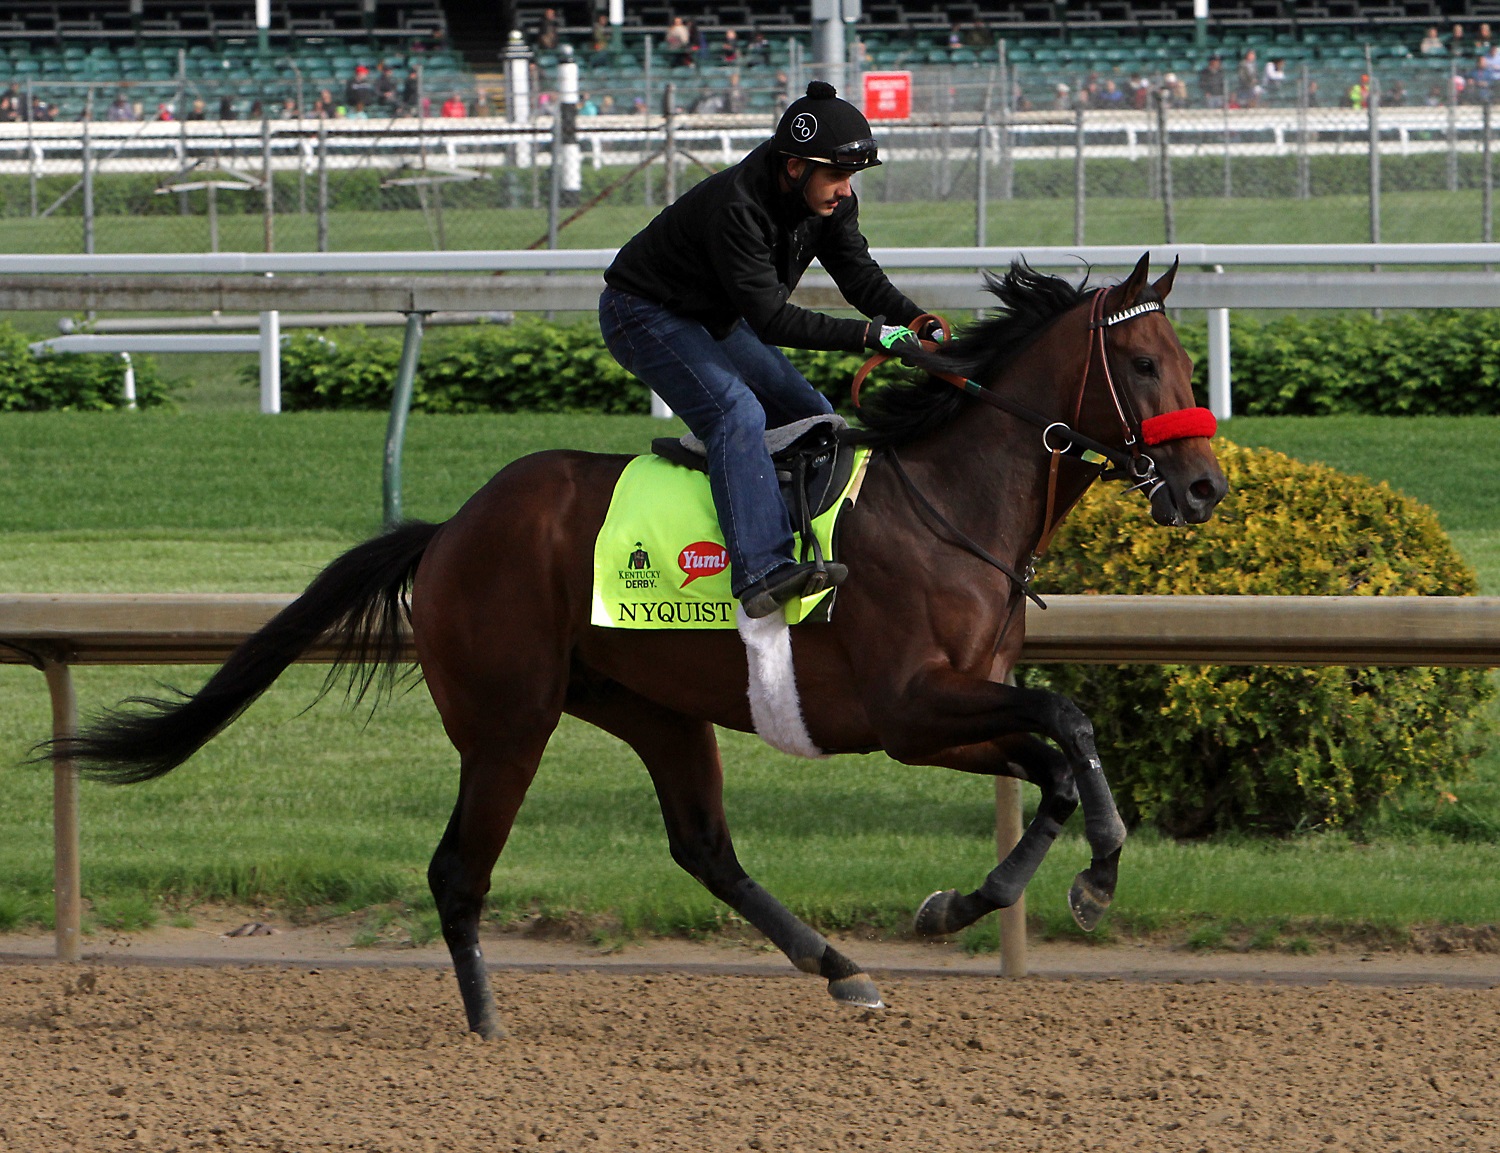 Exercise rider Jonny Garcia rides Kentucky Derby favorite Nyquist during a morning workout at Churchill Downs in Louisville, Ky., Thursday, May 5, 2016. The 142nd Kentucky Derby is Saturday, May 7. (AP Photo/Garry Jones)